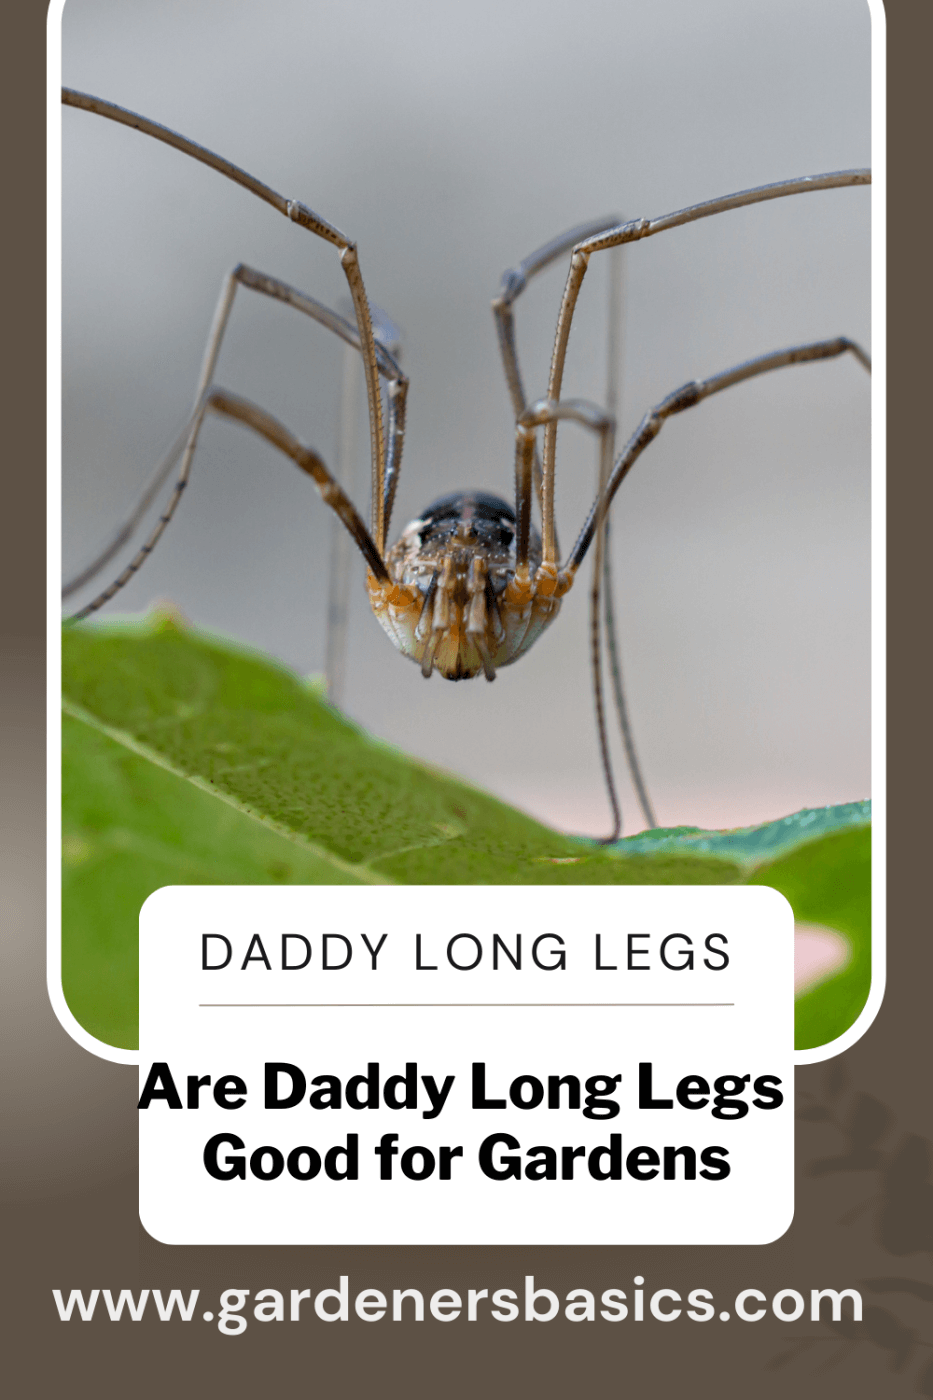 Are Daddy Long Legs Good for Gardens?